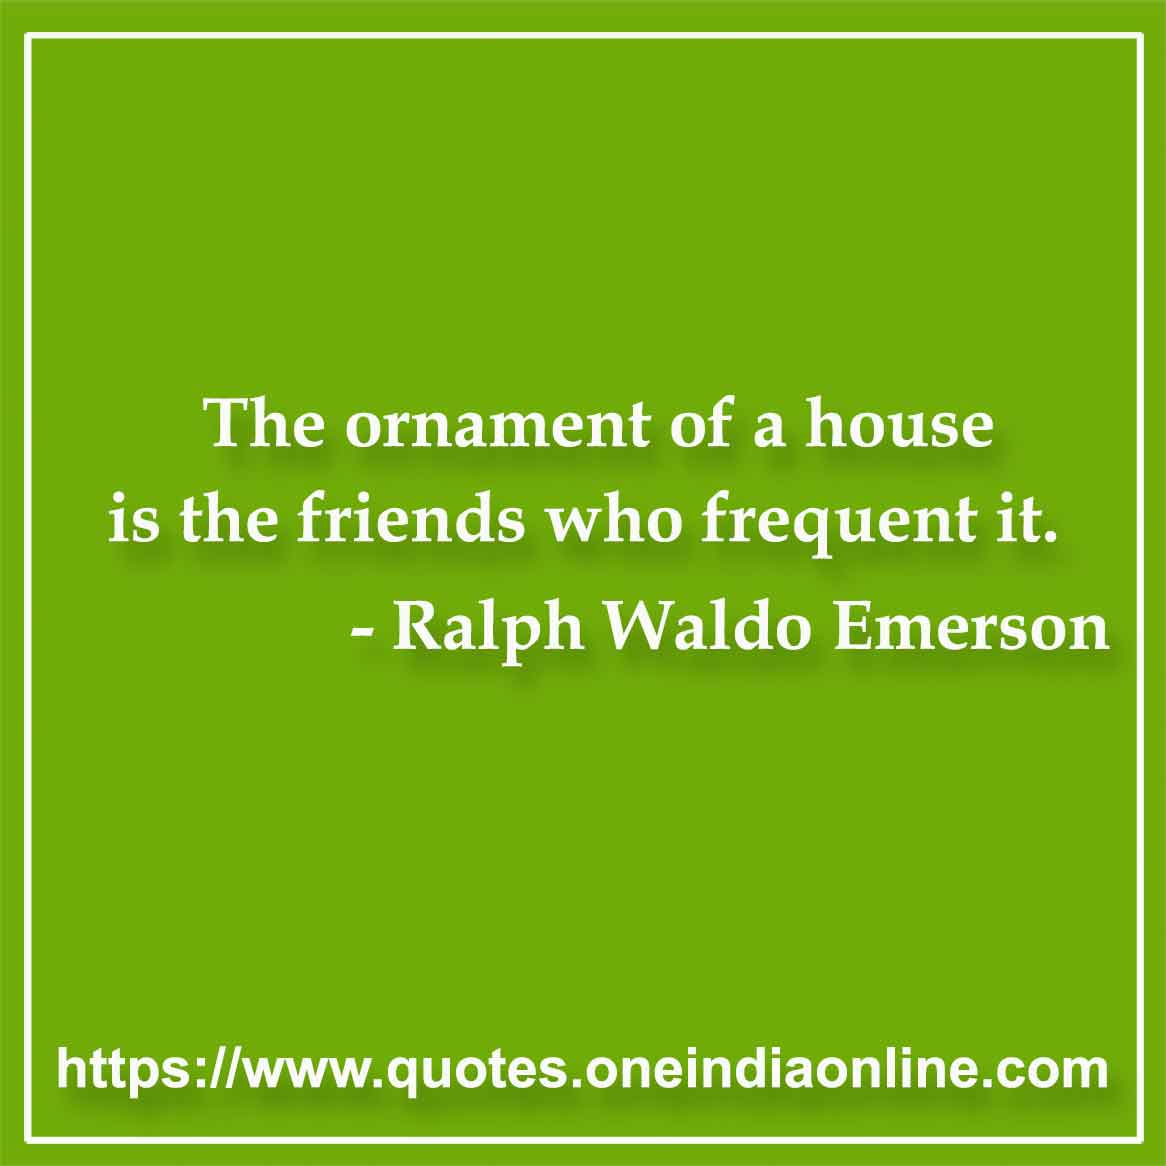 The ornament of a house is the friends who frequent it.

-  by Ralph Waldo Emerson